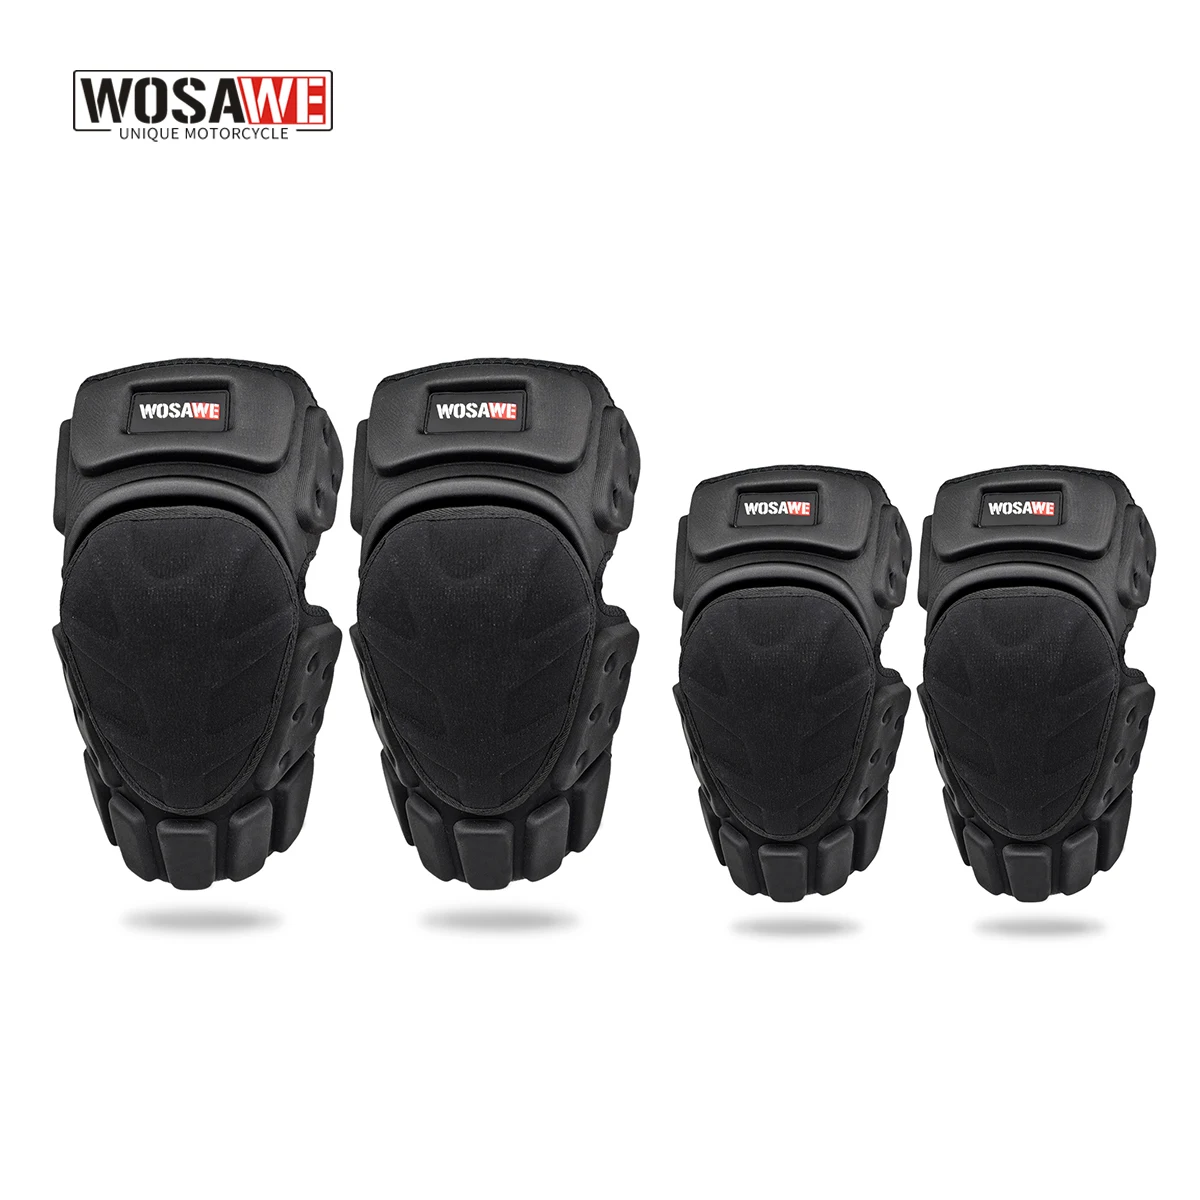 

WOSAWE Cycling Elbow Protector Knee Pads EVA Protective Gear for Motorbike Skiing Skating Skateboard Ridng Racing Safety Guards